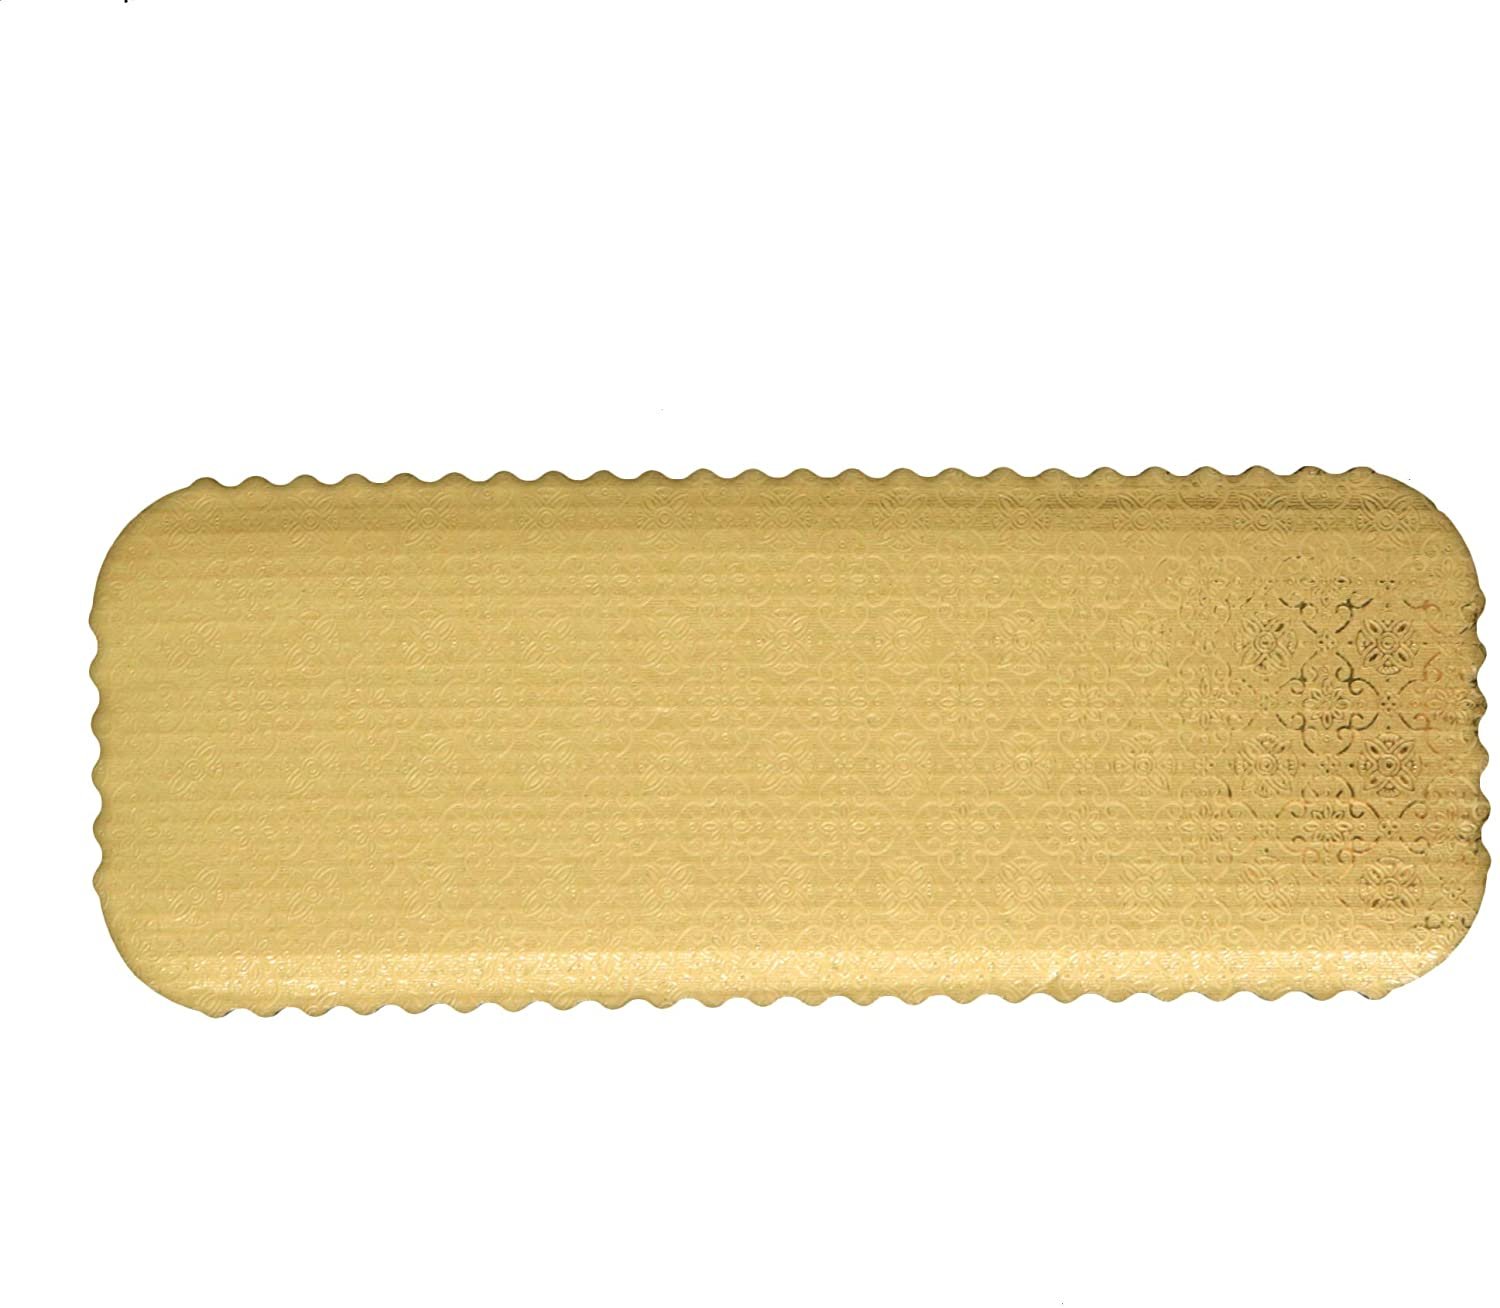 O'Creme Gold-Top Scalloped Narrow Rectangular Cake and Pastry Board 3/32 Inch Thick, 16 Inch x 6 Inch - Pack of 10 - image 1 of 3